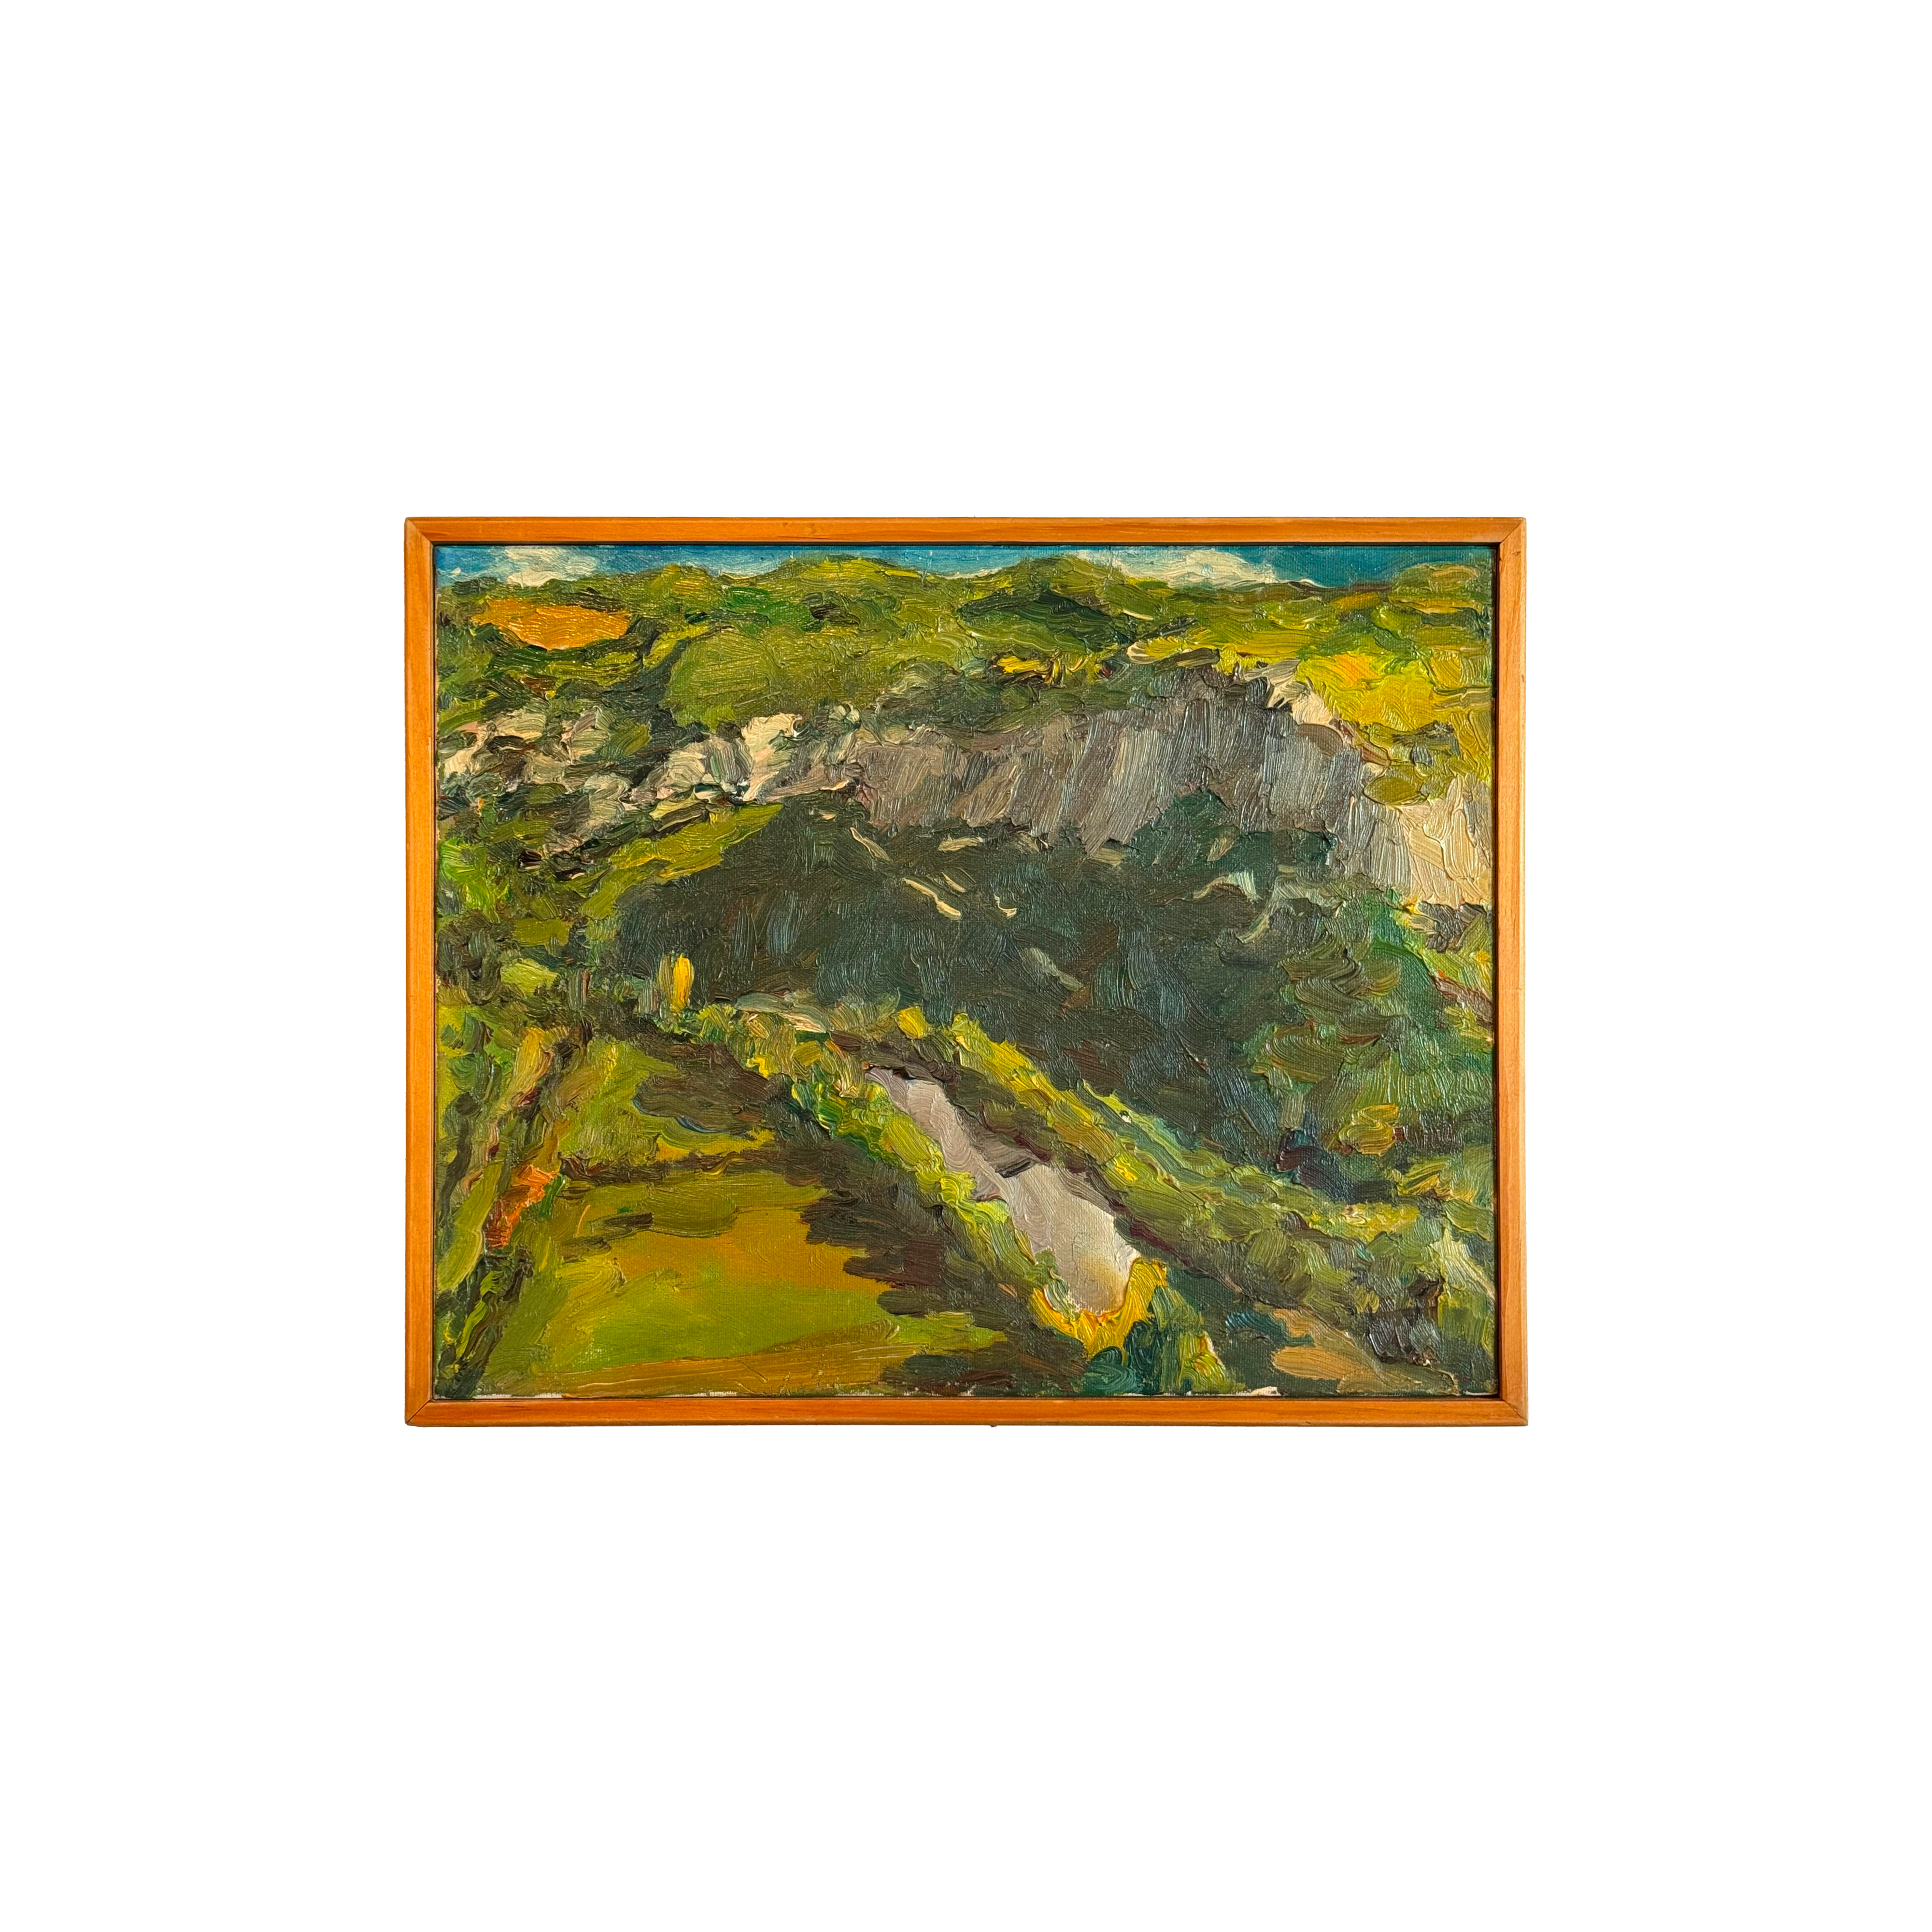 Falaise (Cliff) 2003 Oil Painting